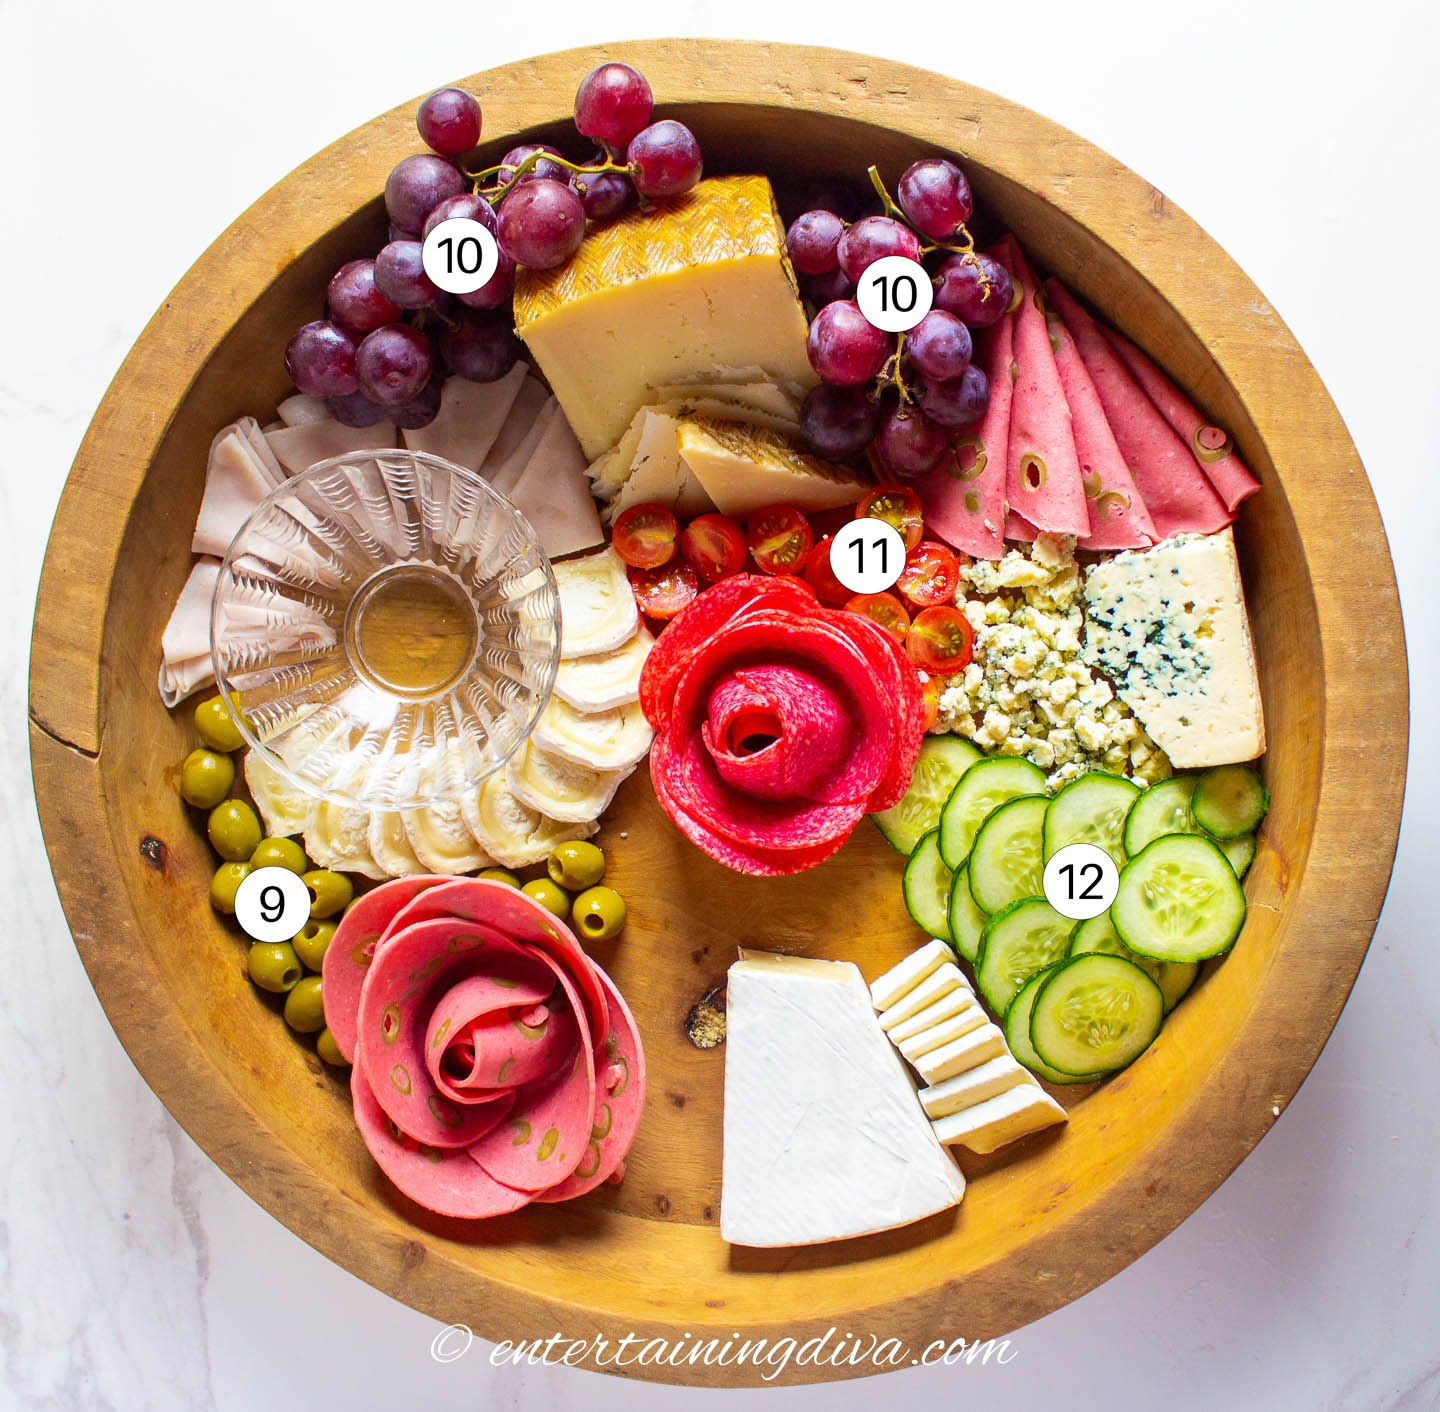 A round charcuterie board with cheeses, meats, olives, grapes, cherry tomatoes and cucumbers on it.